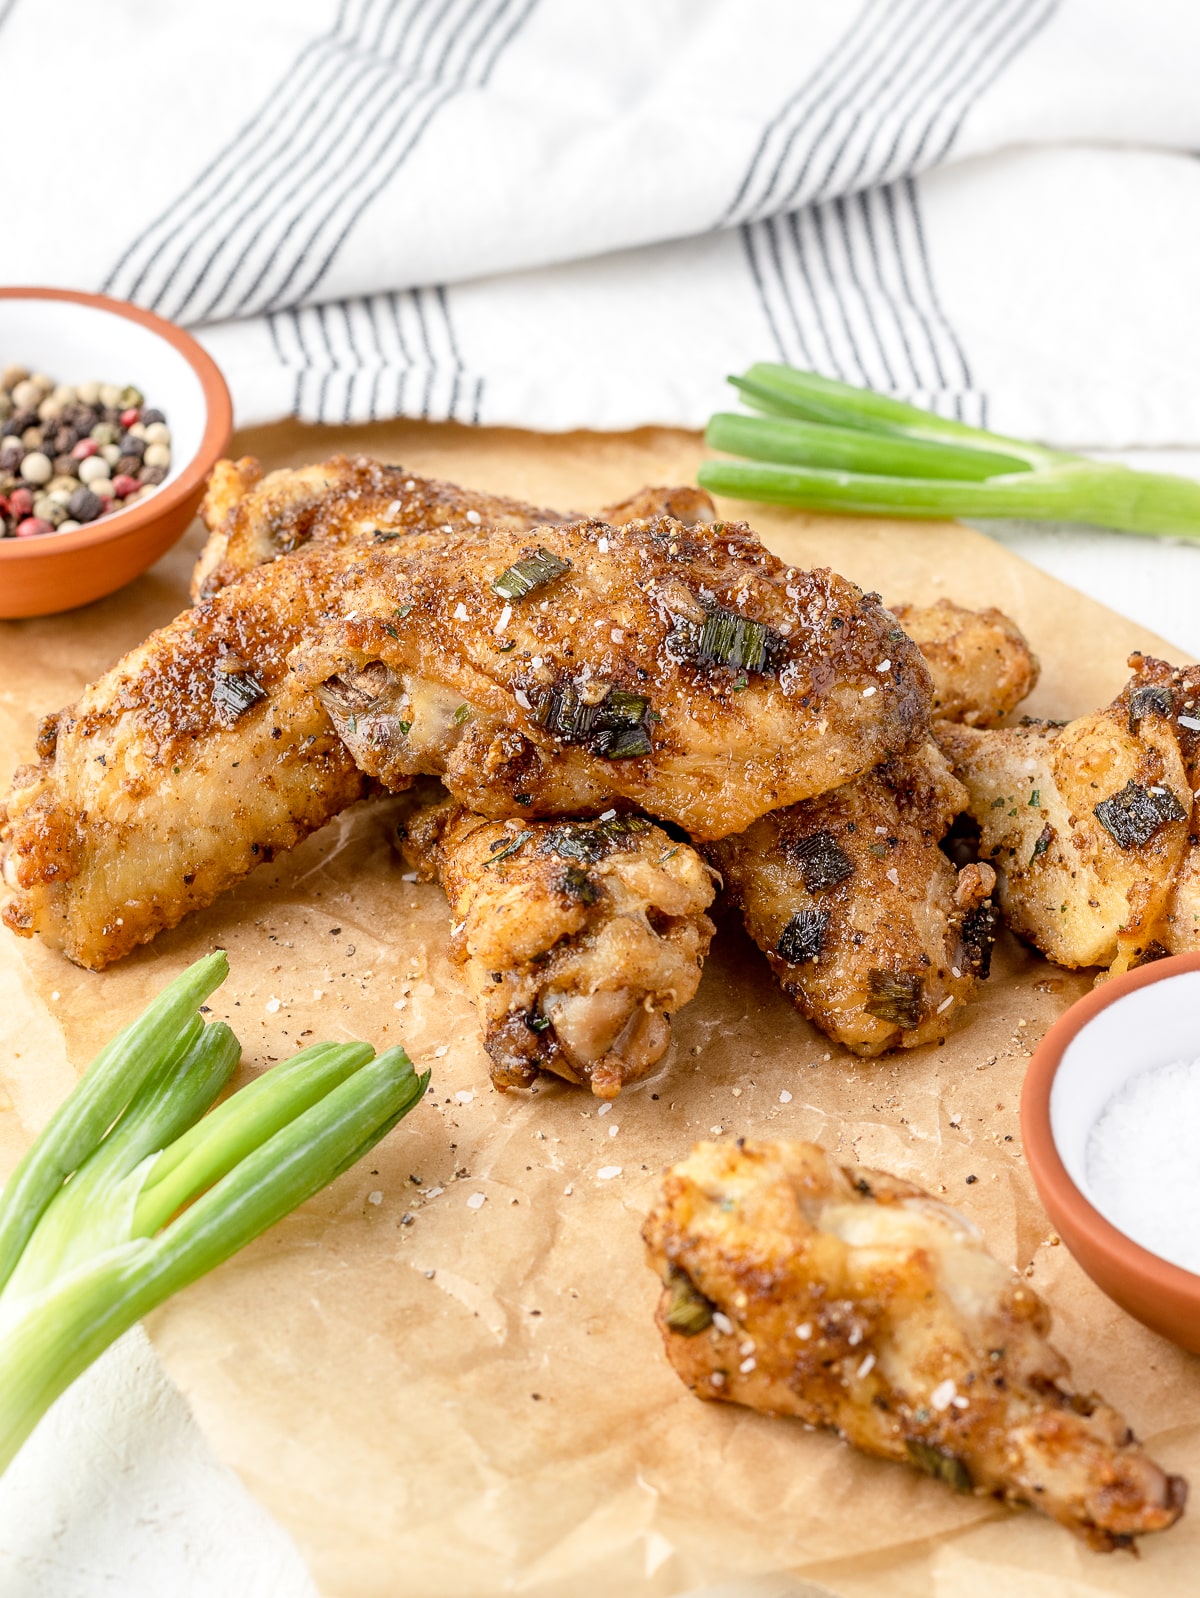 Salt and Pepper Chicken Wings on parchment paper ready to grab and eat.